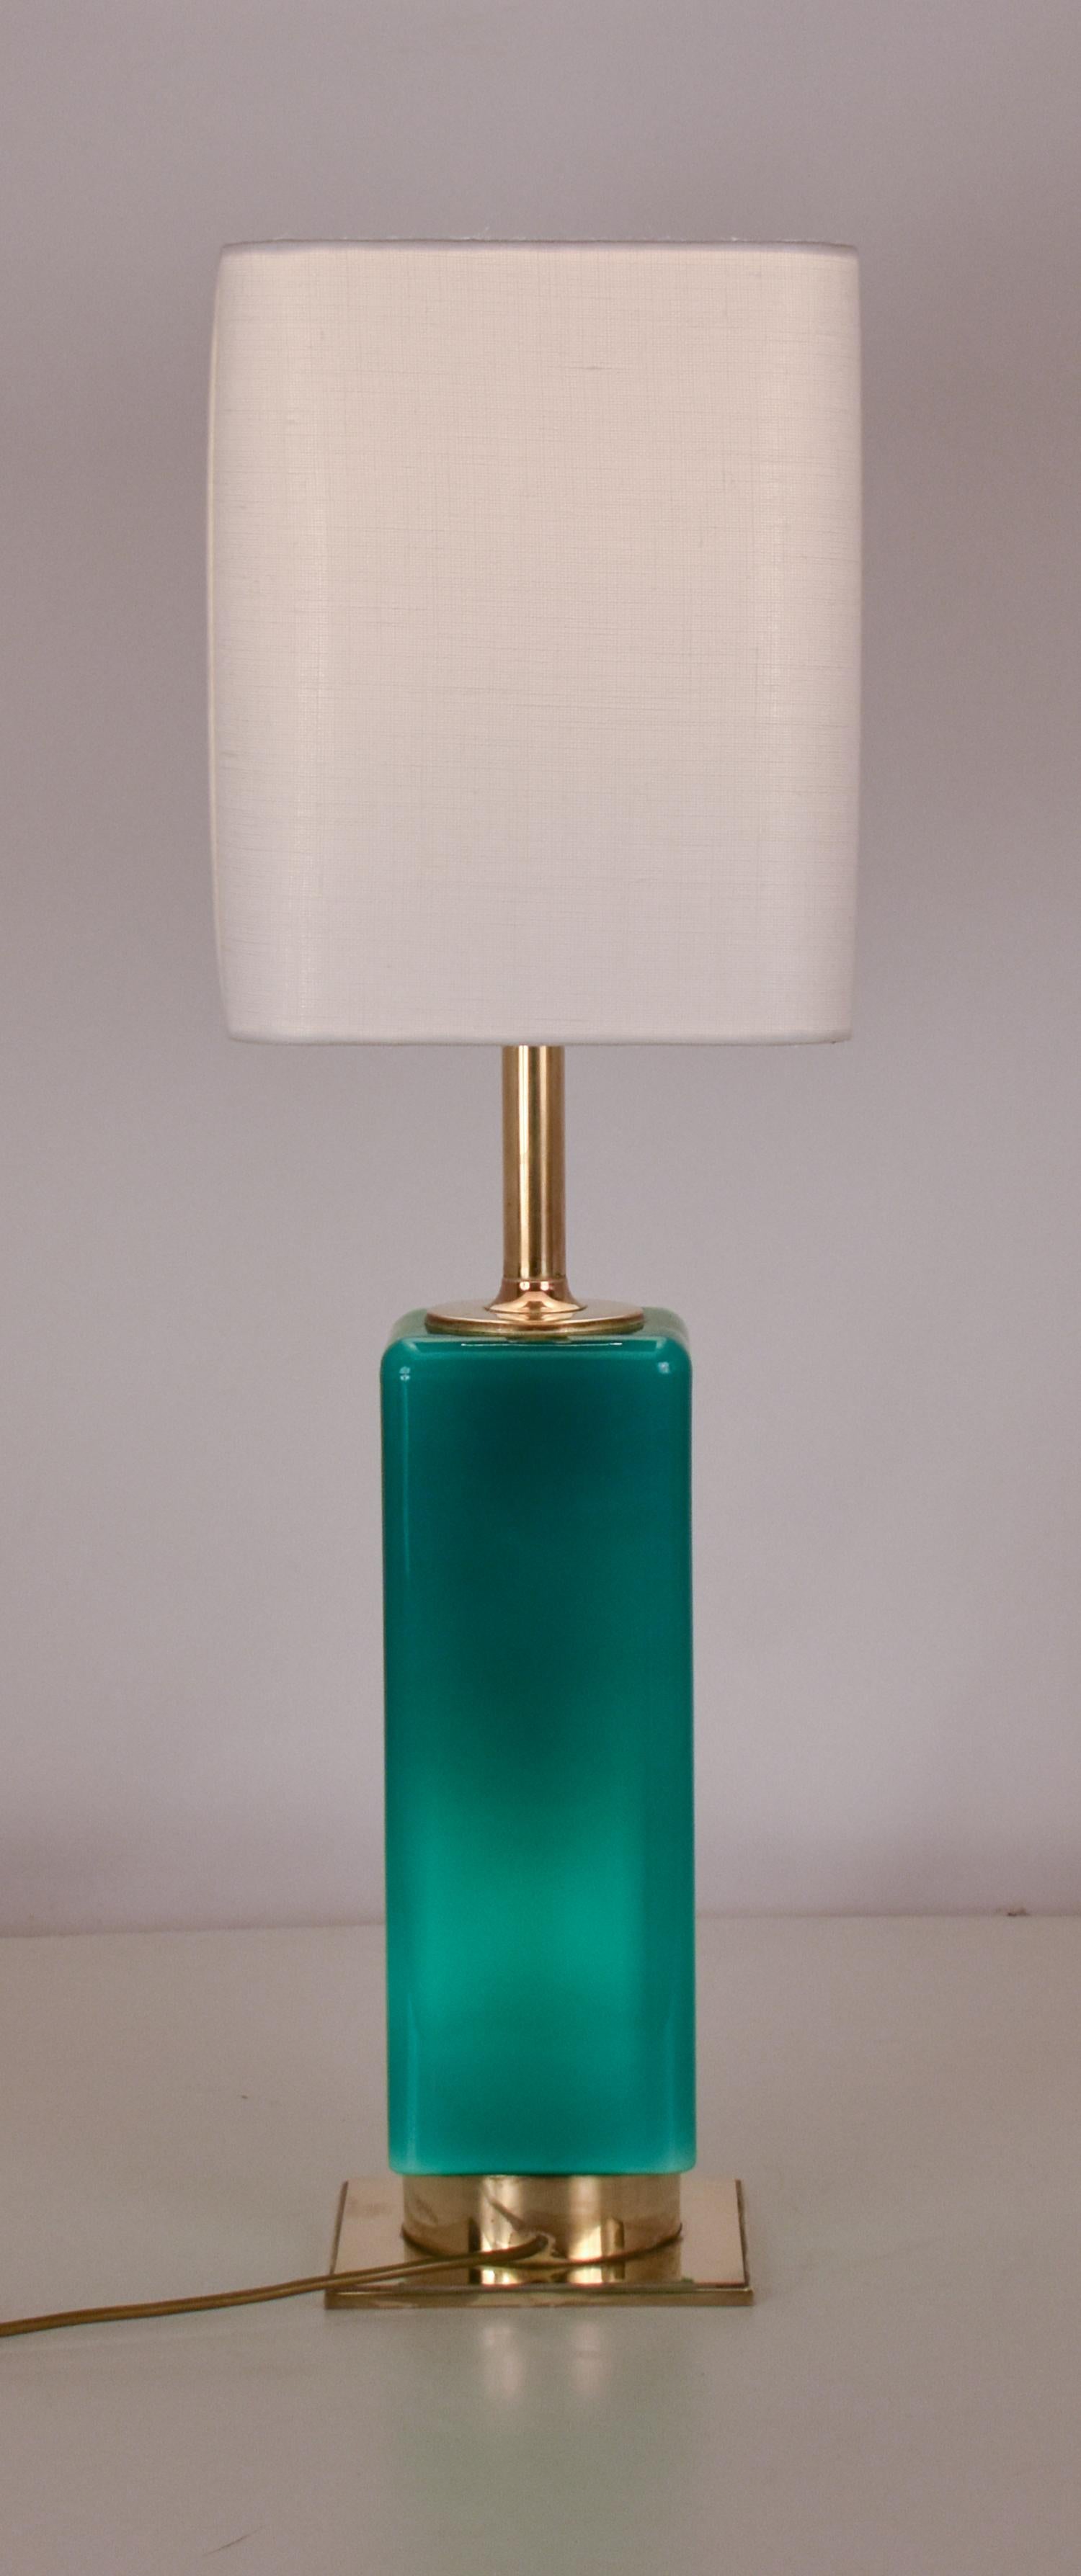 Mid- Century Large Green Glass and Brass Table Lamp Metalarte, Spain, 1970's For Sale 1